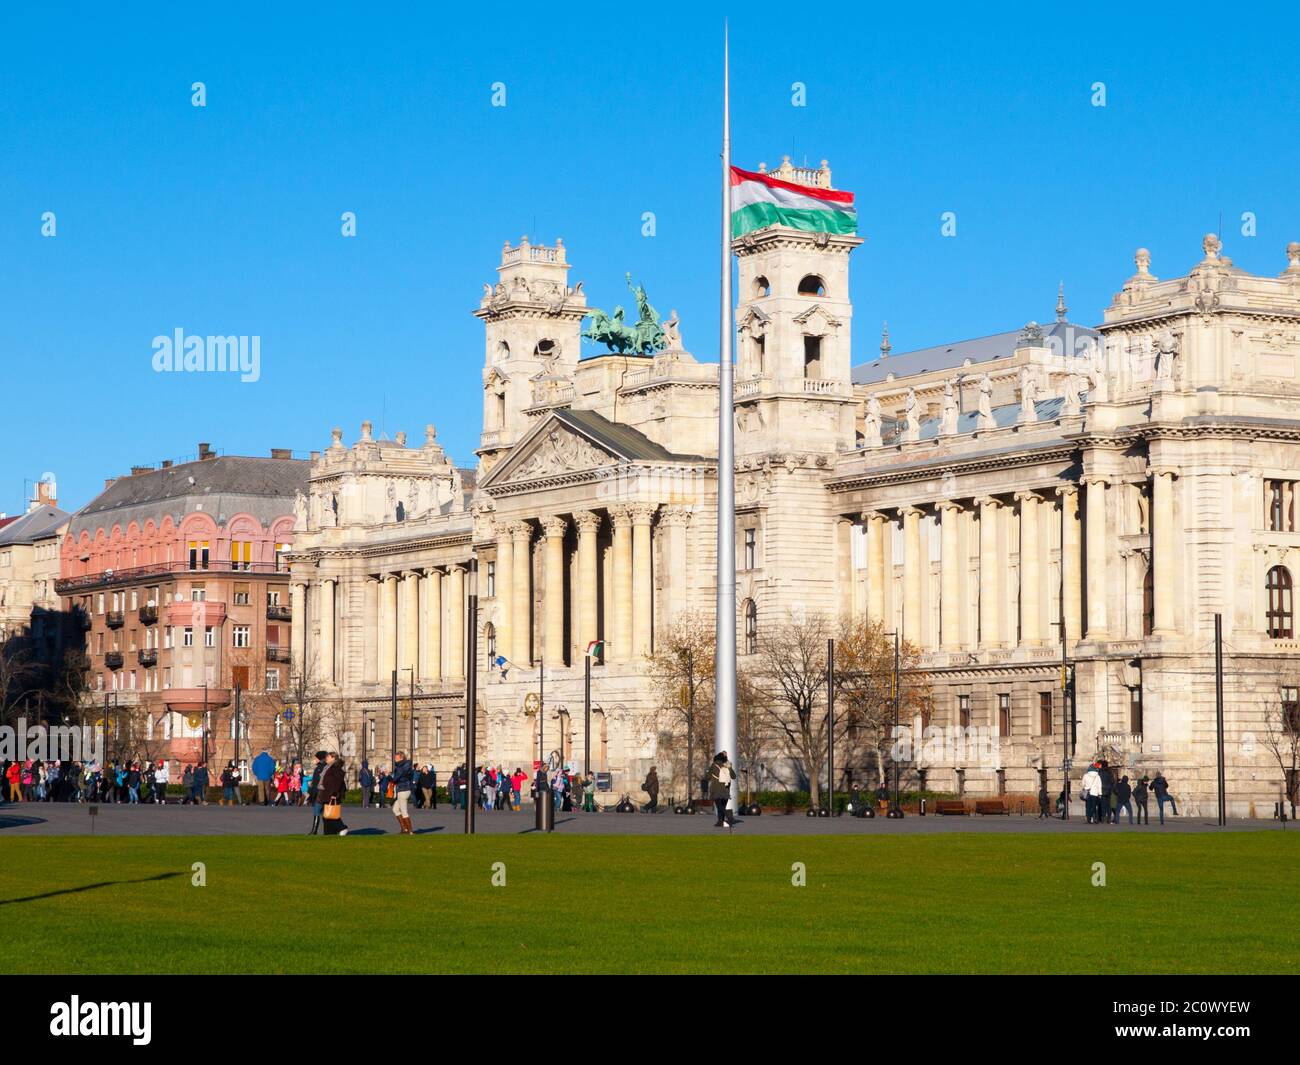 Hungarian National Museum of Ethnography, aka Neprajzi Muzeum, at Kossuth Lajos Square in Budapest, Hungary, Europe. View of entrance portal with two towers and architectural columns on sunny day with clear blue sky. UNESCO World Heritage Site. Stock Photo